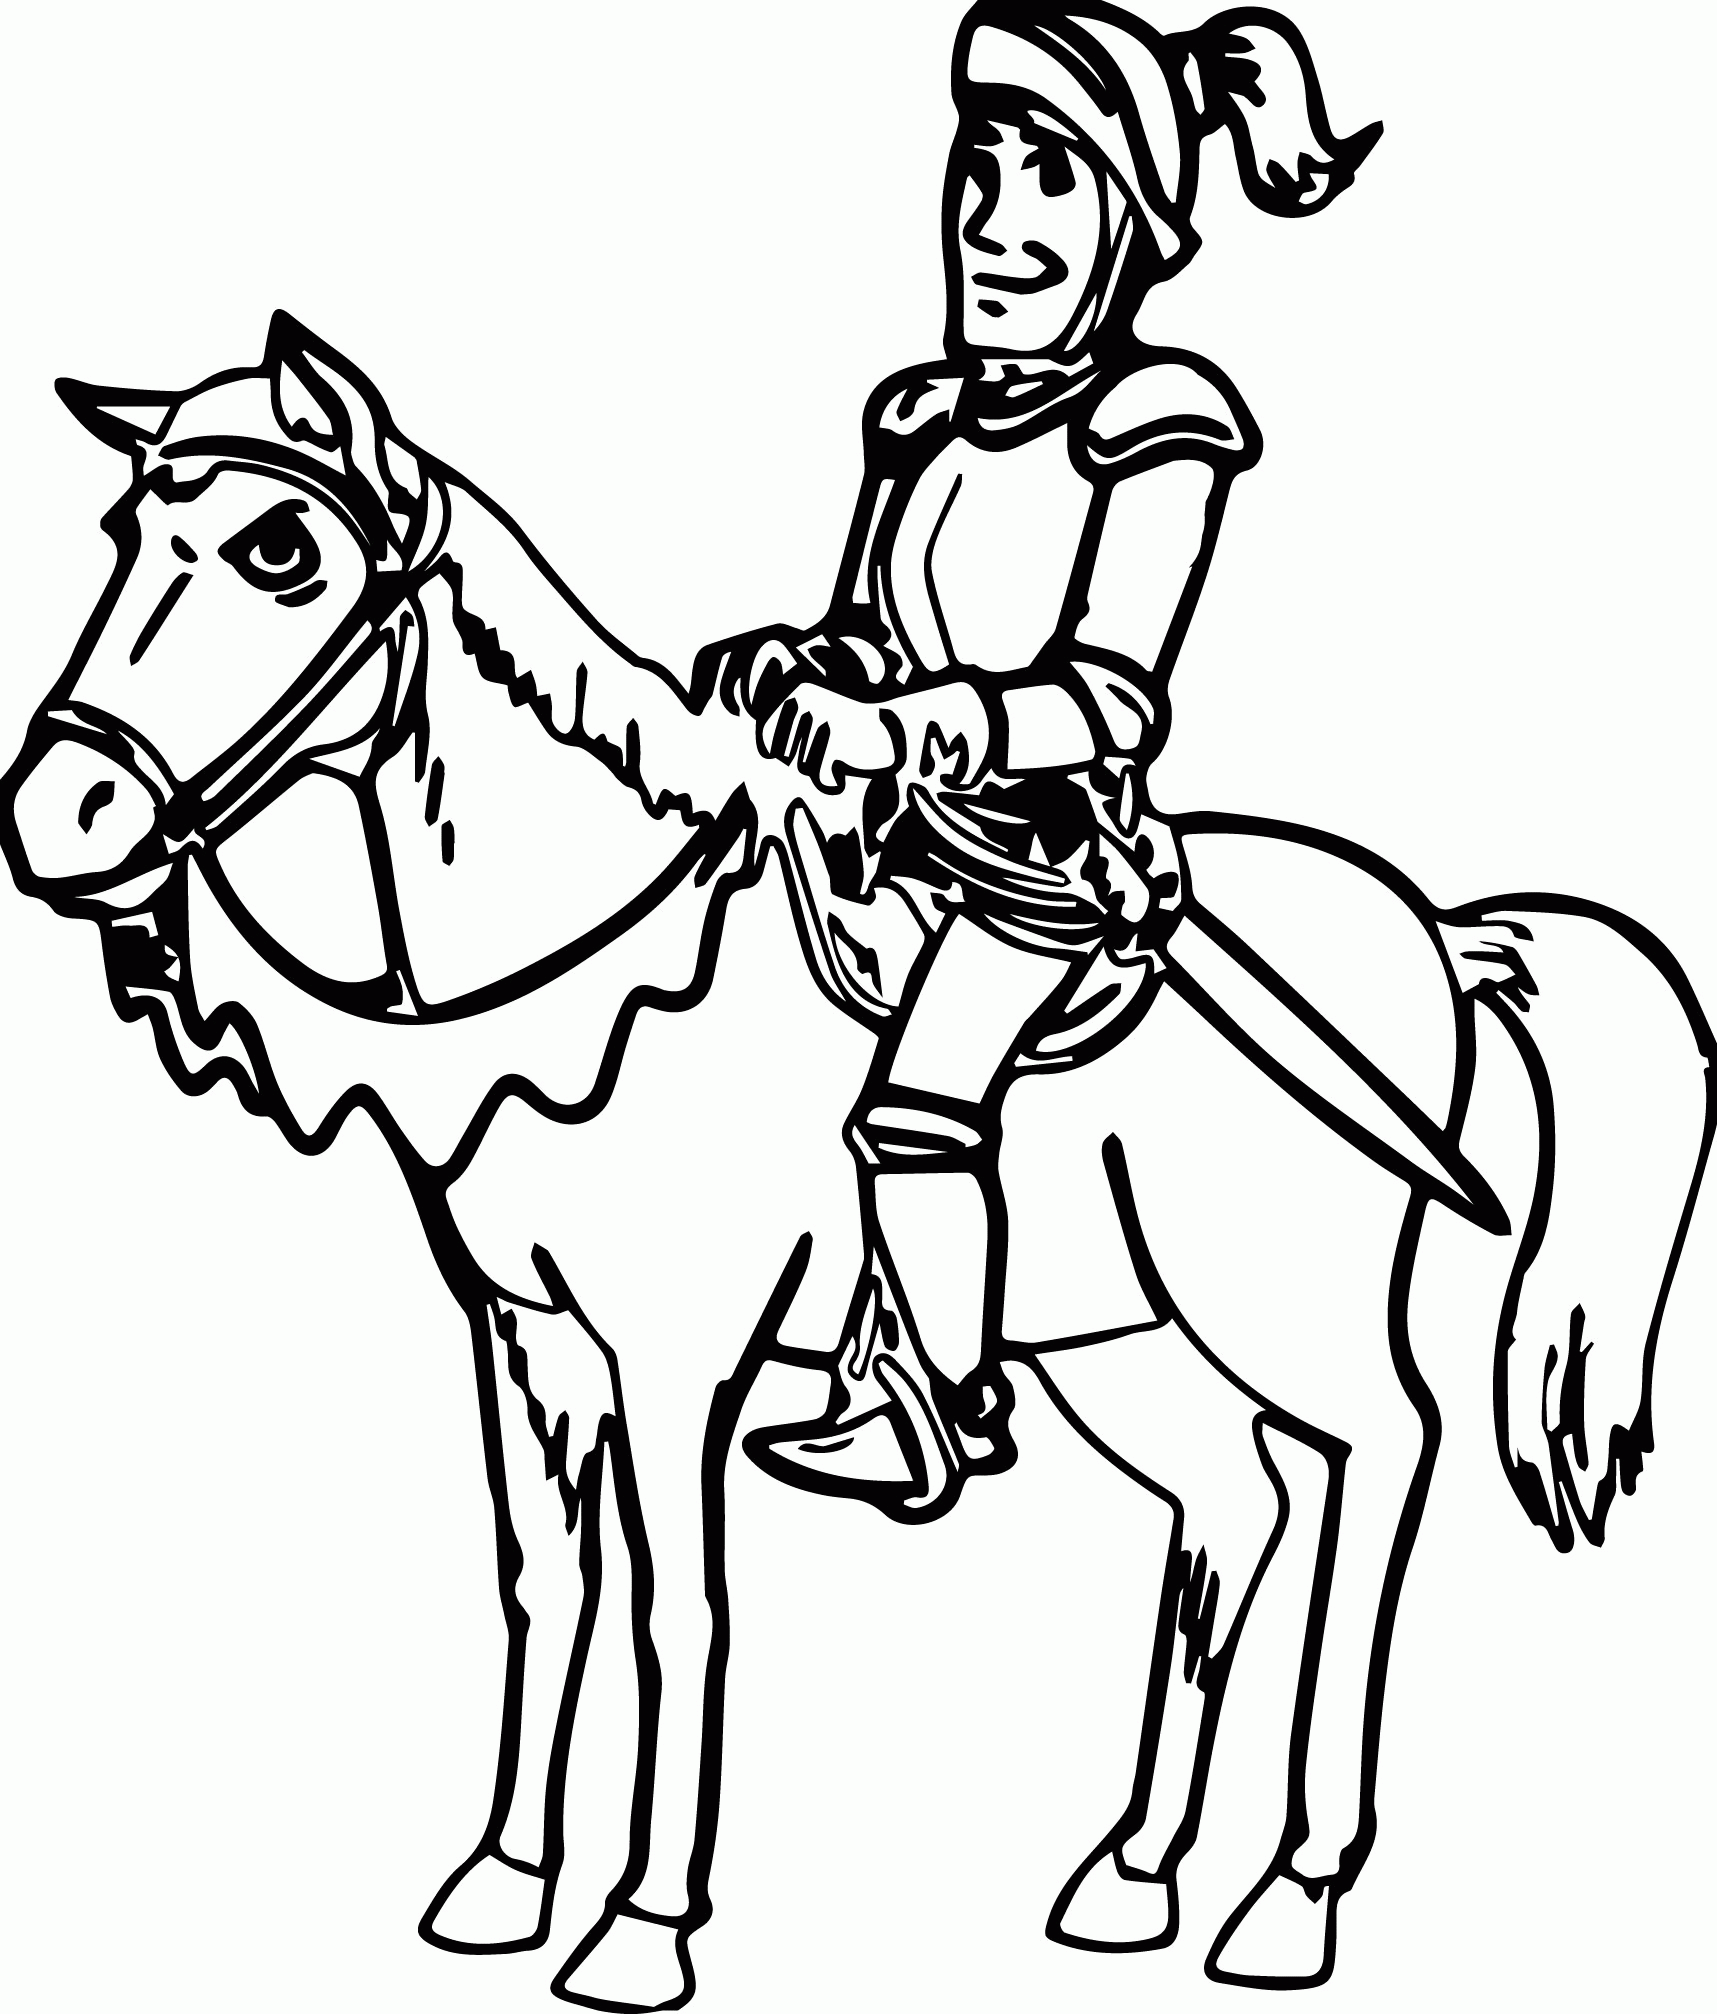 Cartoon Horse With Knight Coloring Page One Page | Wecoloringpage